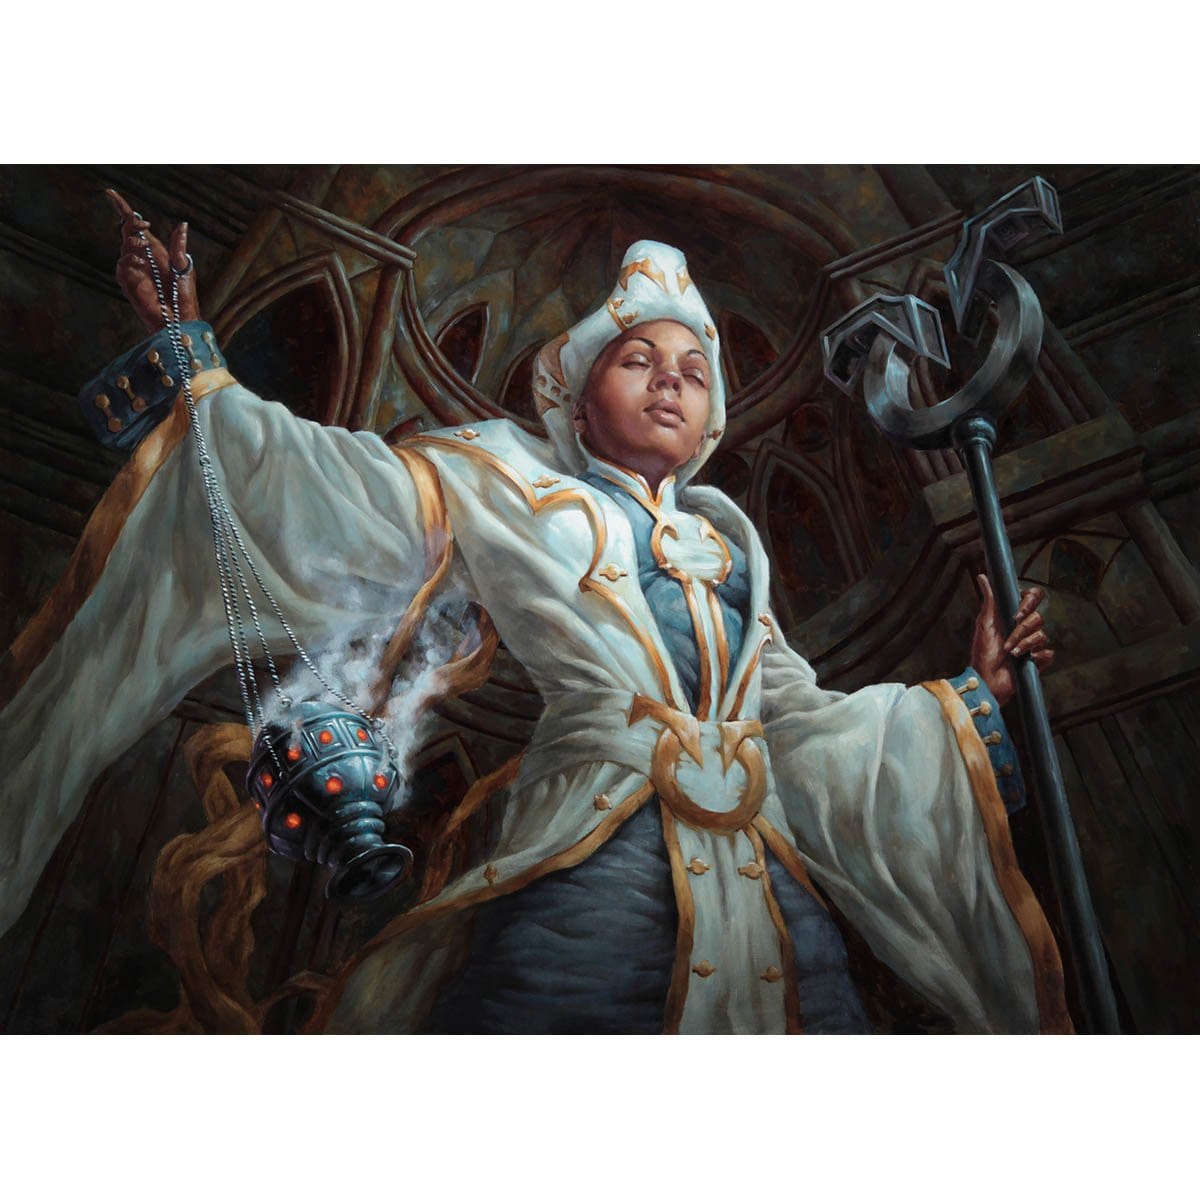 Cathedral Sanctifier Print - Print - Original Magic Art - Accessories for Magic the Gathering and other card games